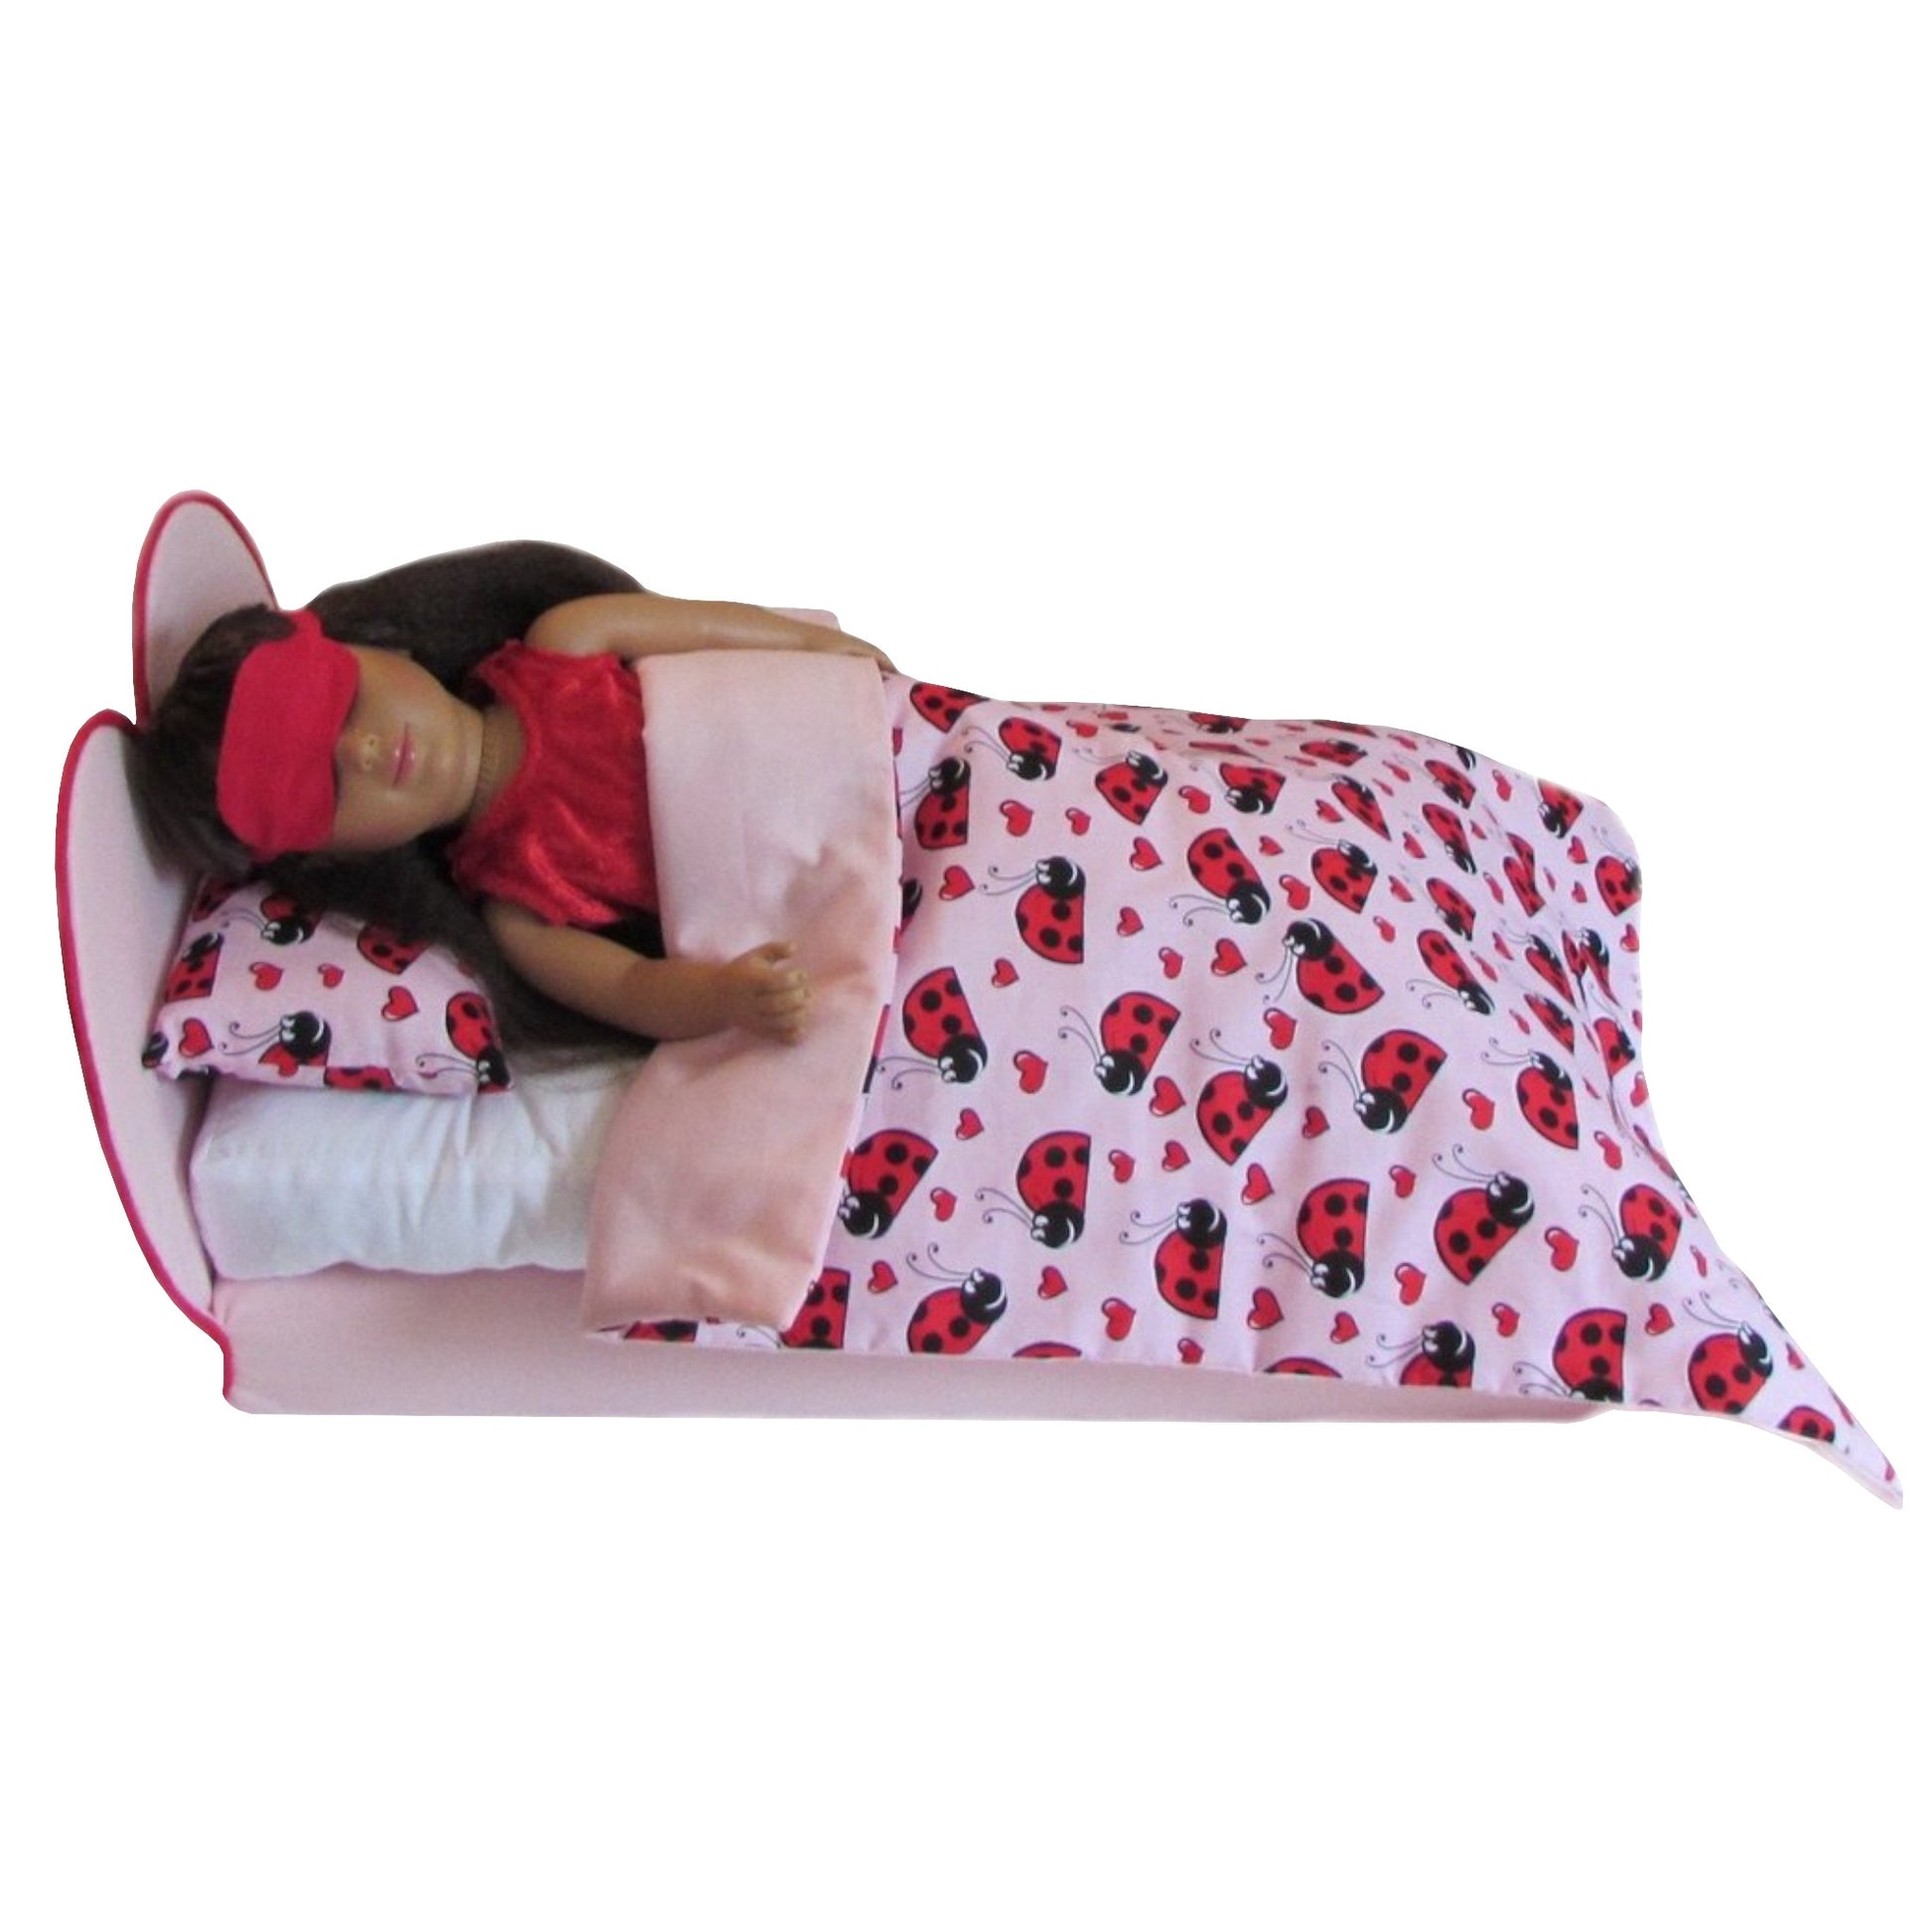 Upholstered Pink and Red Heart Doll Bed for 18-inch dolls 18 inch doll eye mask doll bedding